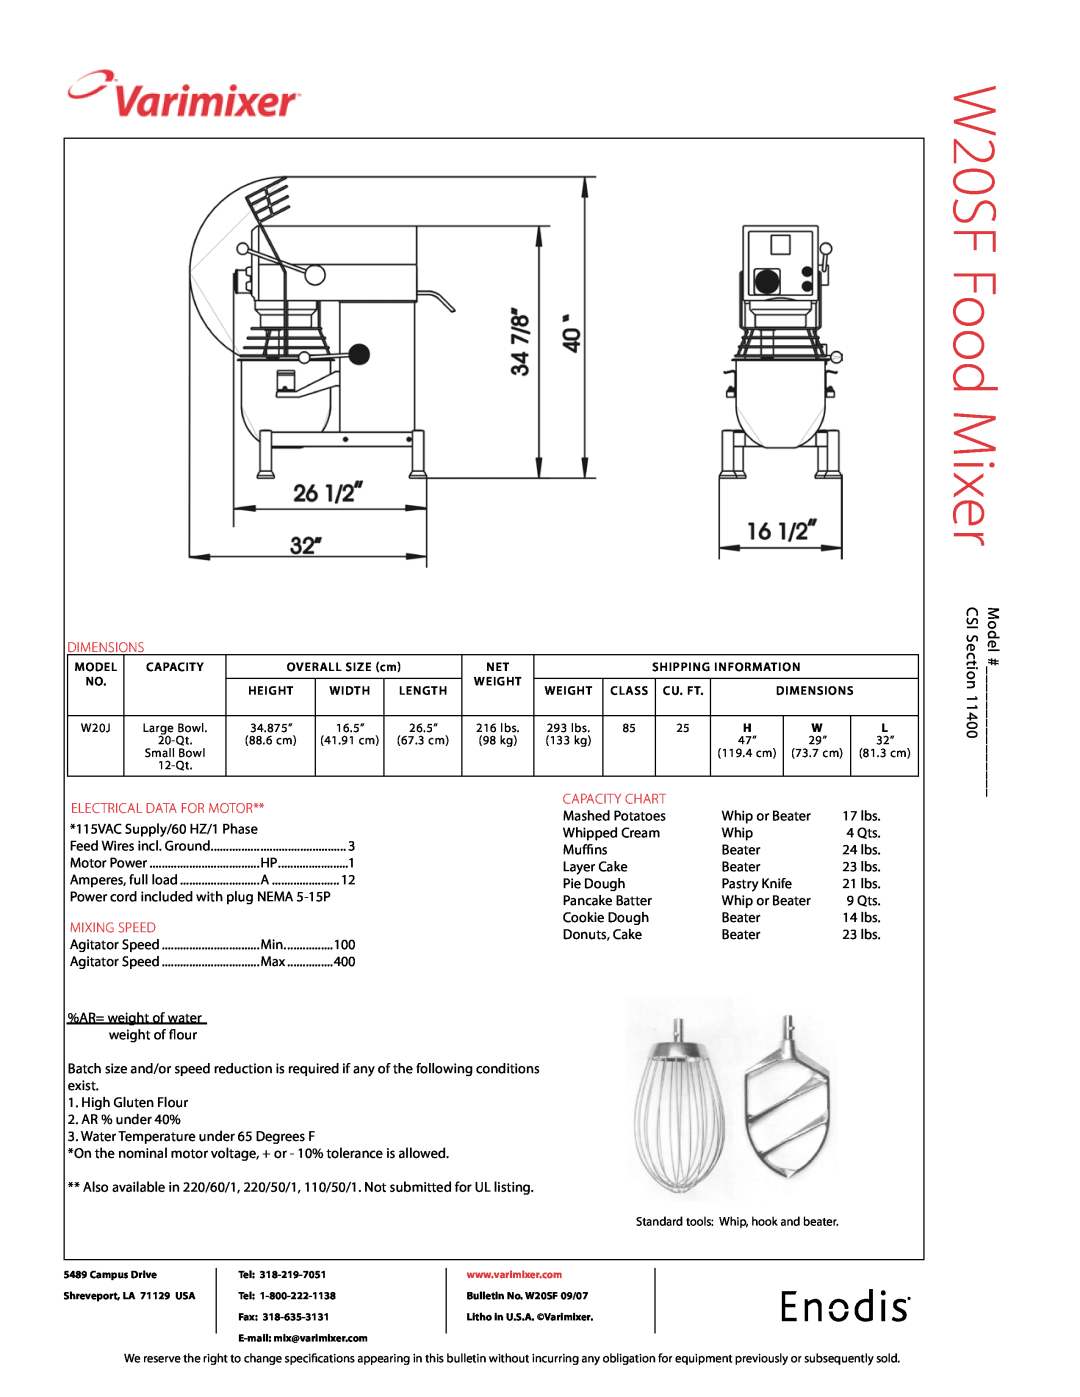 Varimixer W20SF dimensions, electrical data for motor, mixing speed, AR= weight of water weight of flour, capacity chart 